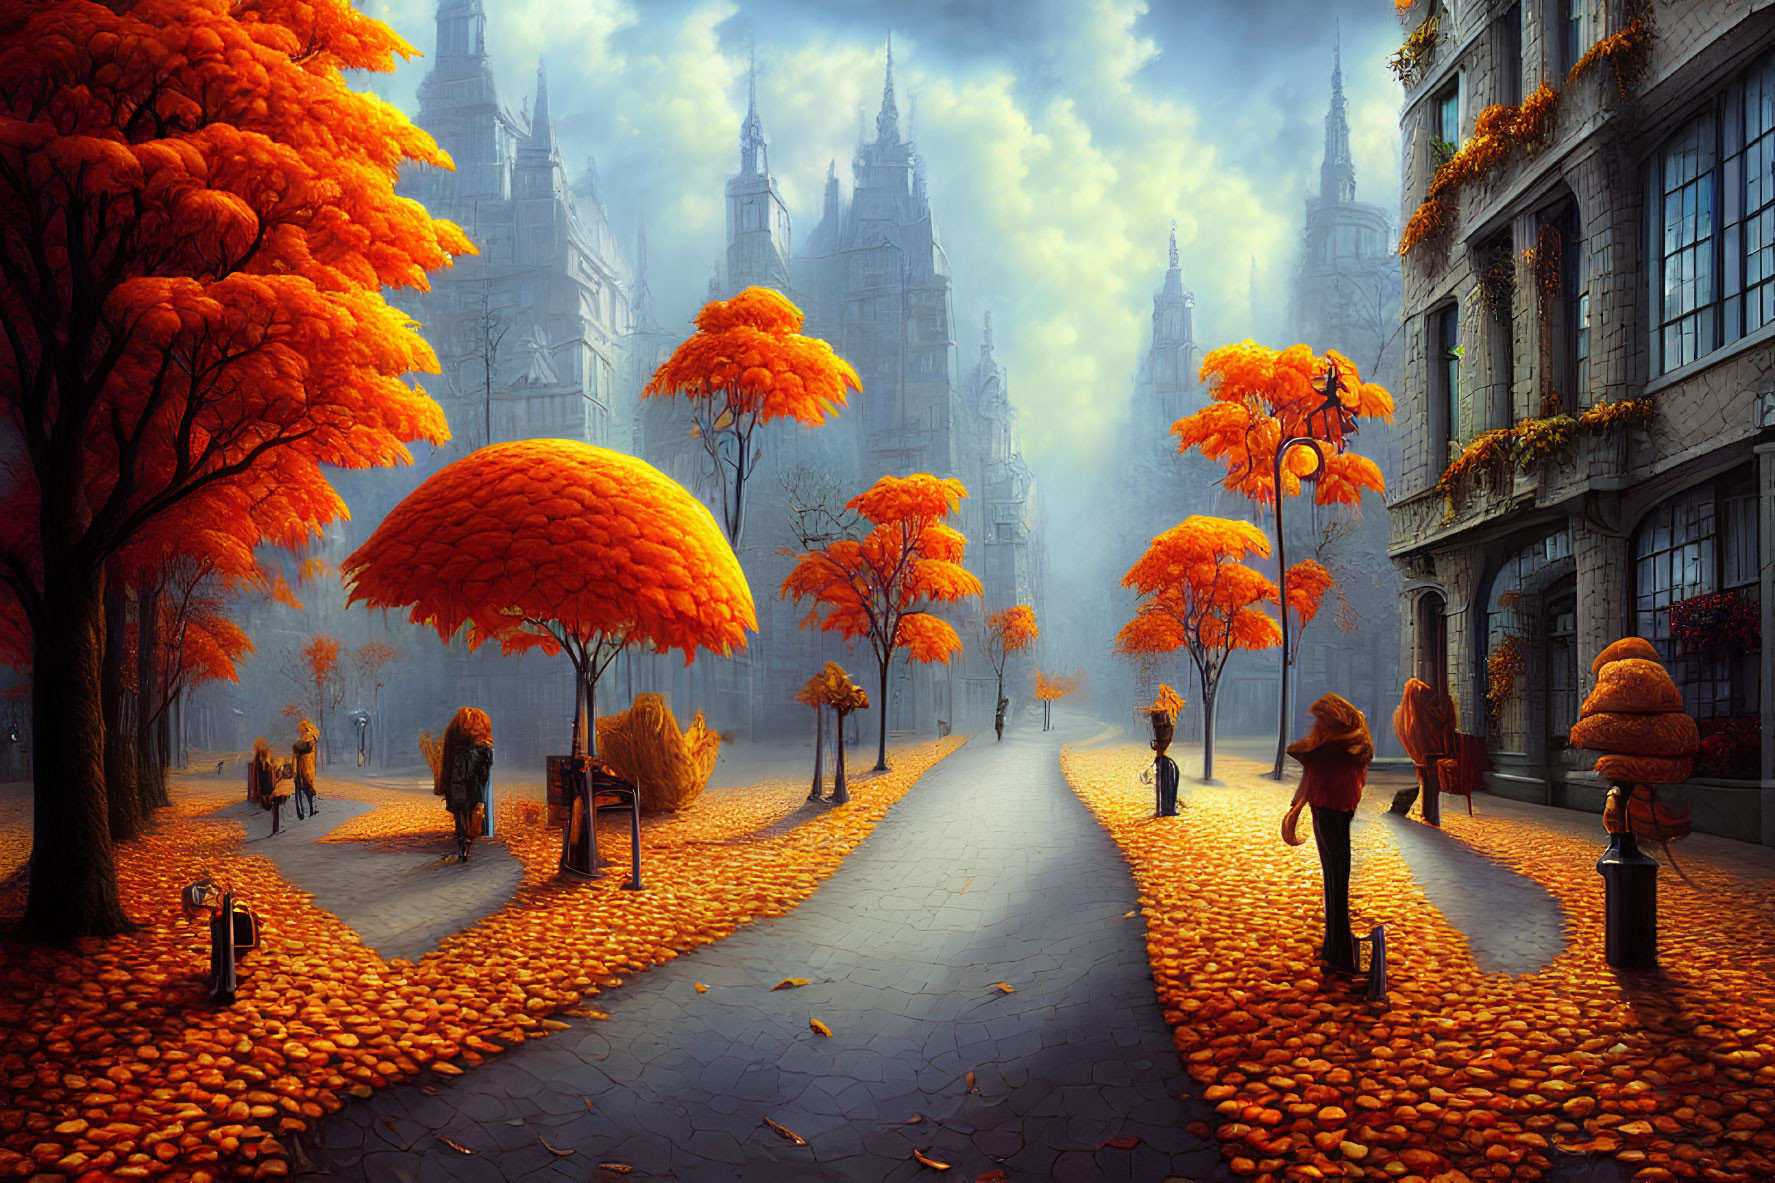 Cobblestone road with orange-leafed trees and street lamps on misty autumn day